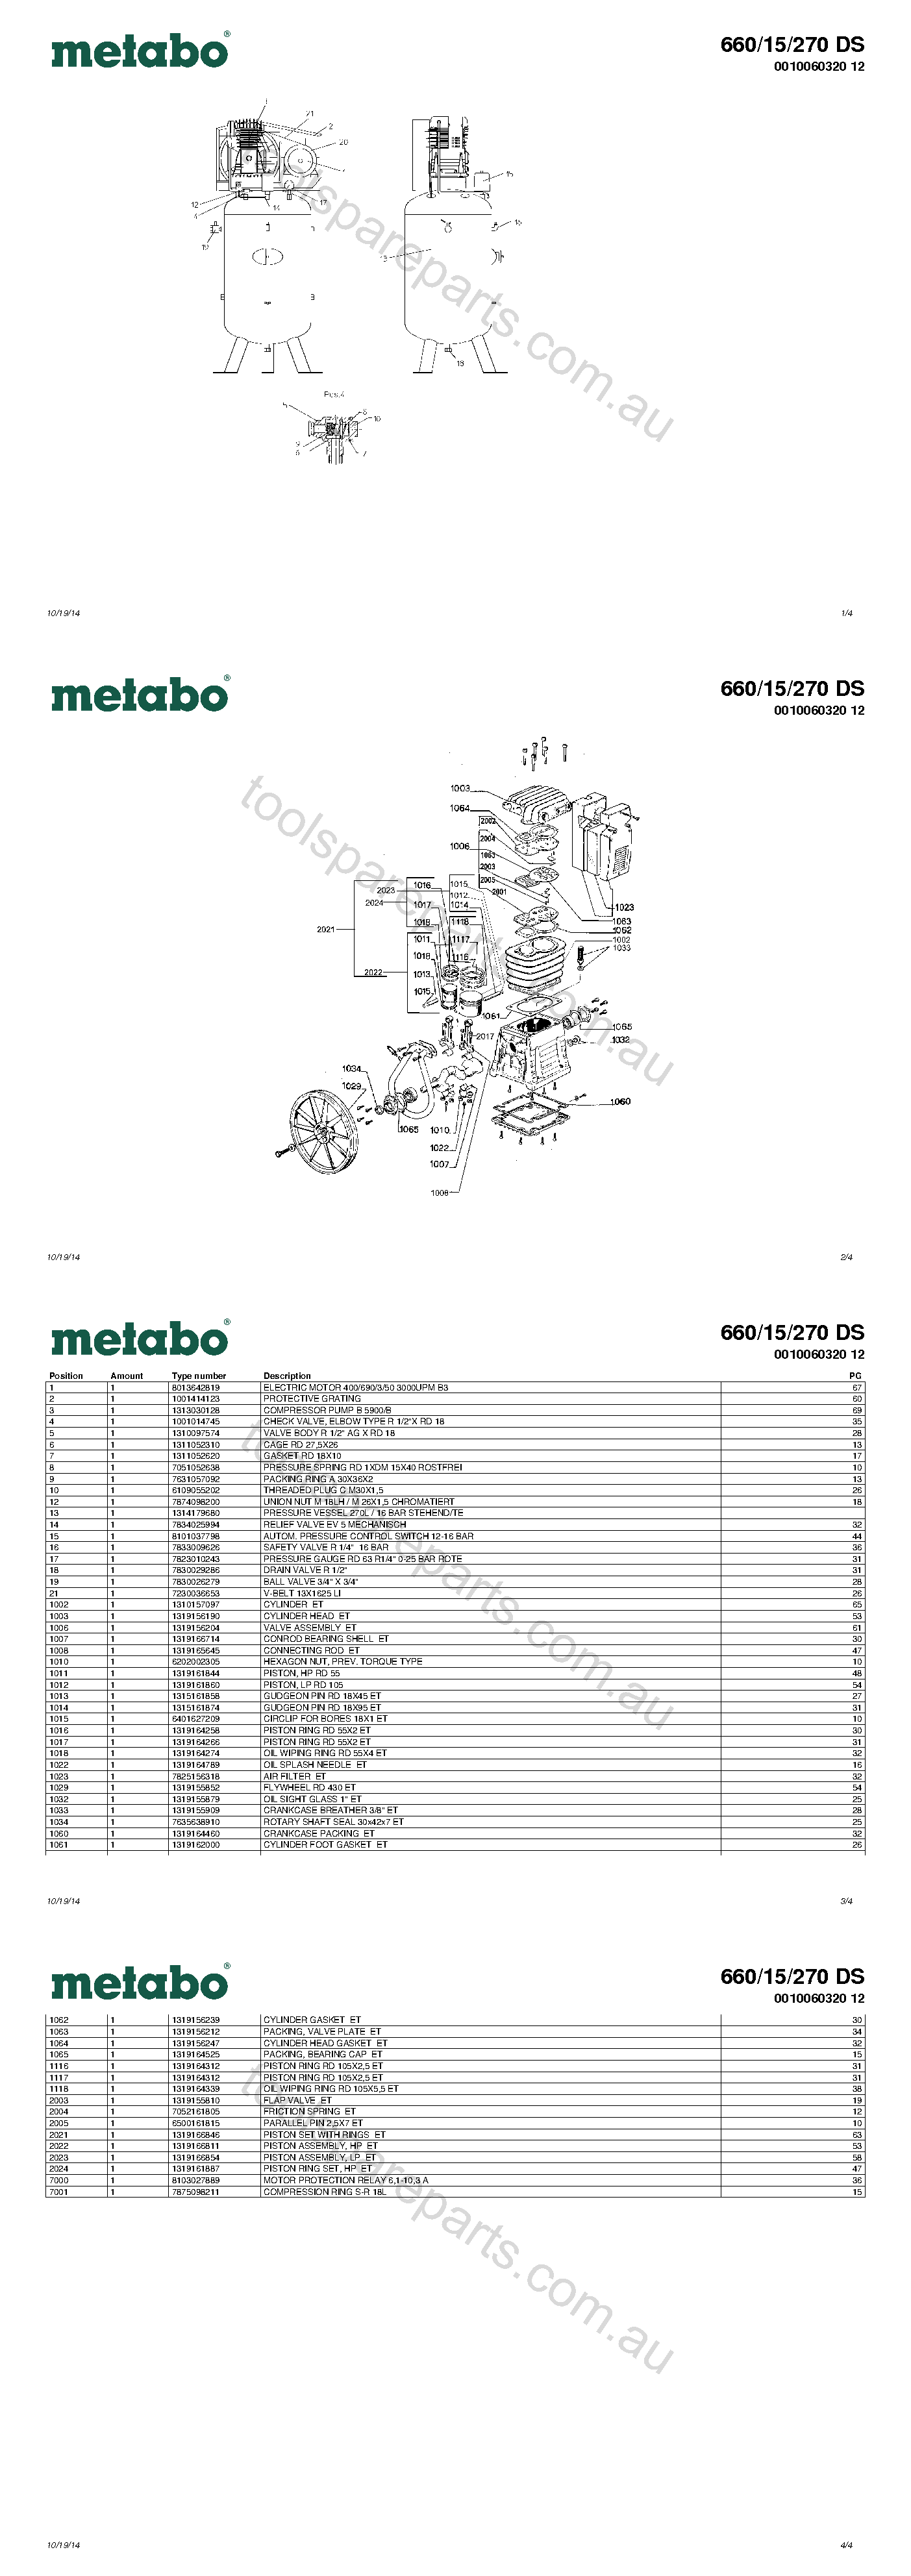 Metabo 660/15/270 DS 0010060320 12  Diagram 1